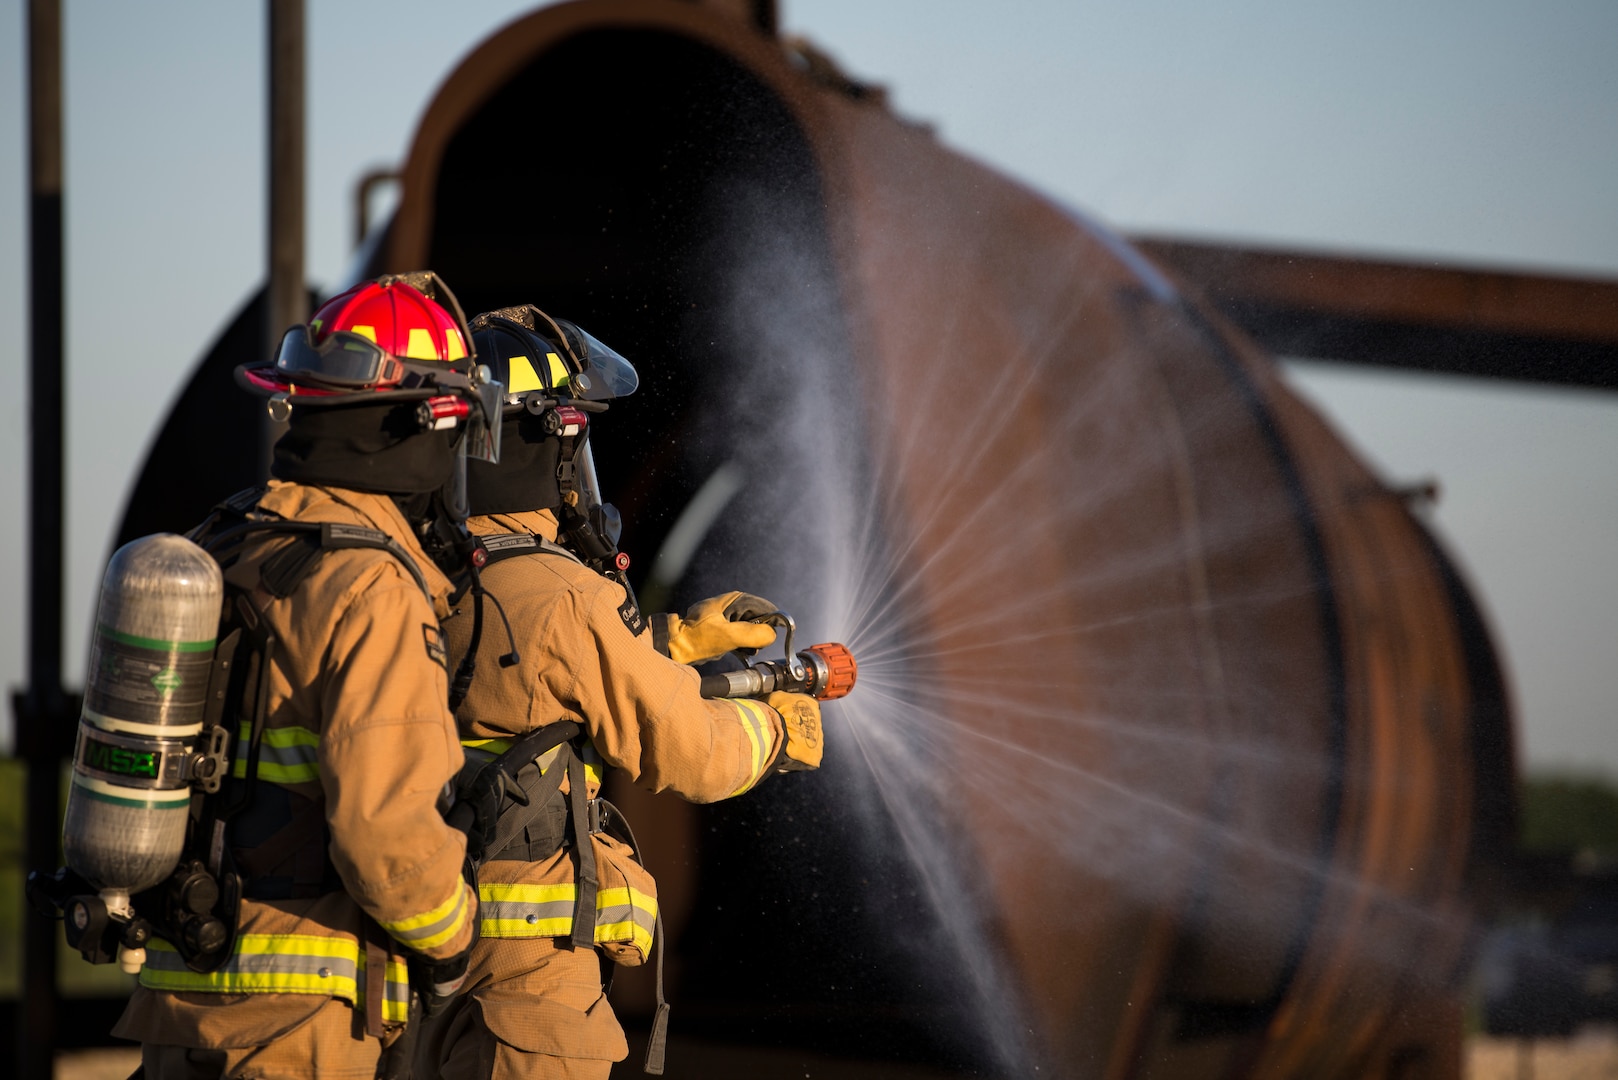 Firefighters from Joint Base San Antonio-Randolph prepare a fire hose before entering a mockup aircraft April 11, 2018 at the Camp Talon fire training grounds on JBSA-Randolph. The training offers firefighters the opportunity to train with live fire to get as close to a real-life scenario as possible. (U.S. Air Force photo by Senior Airman Gwendalyn Smith)